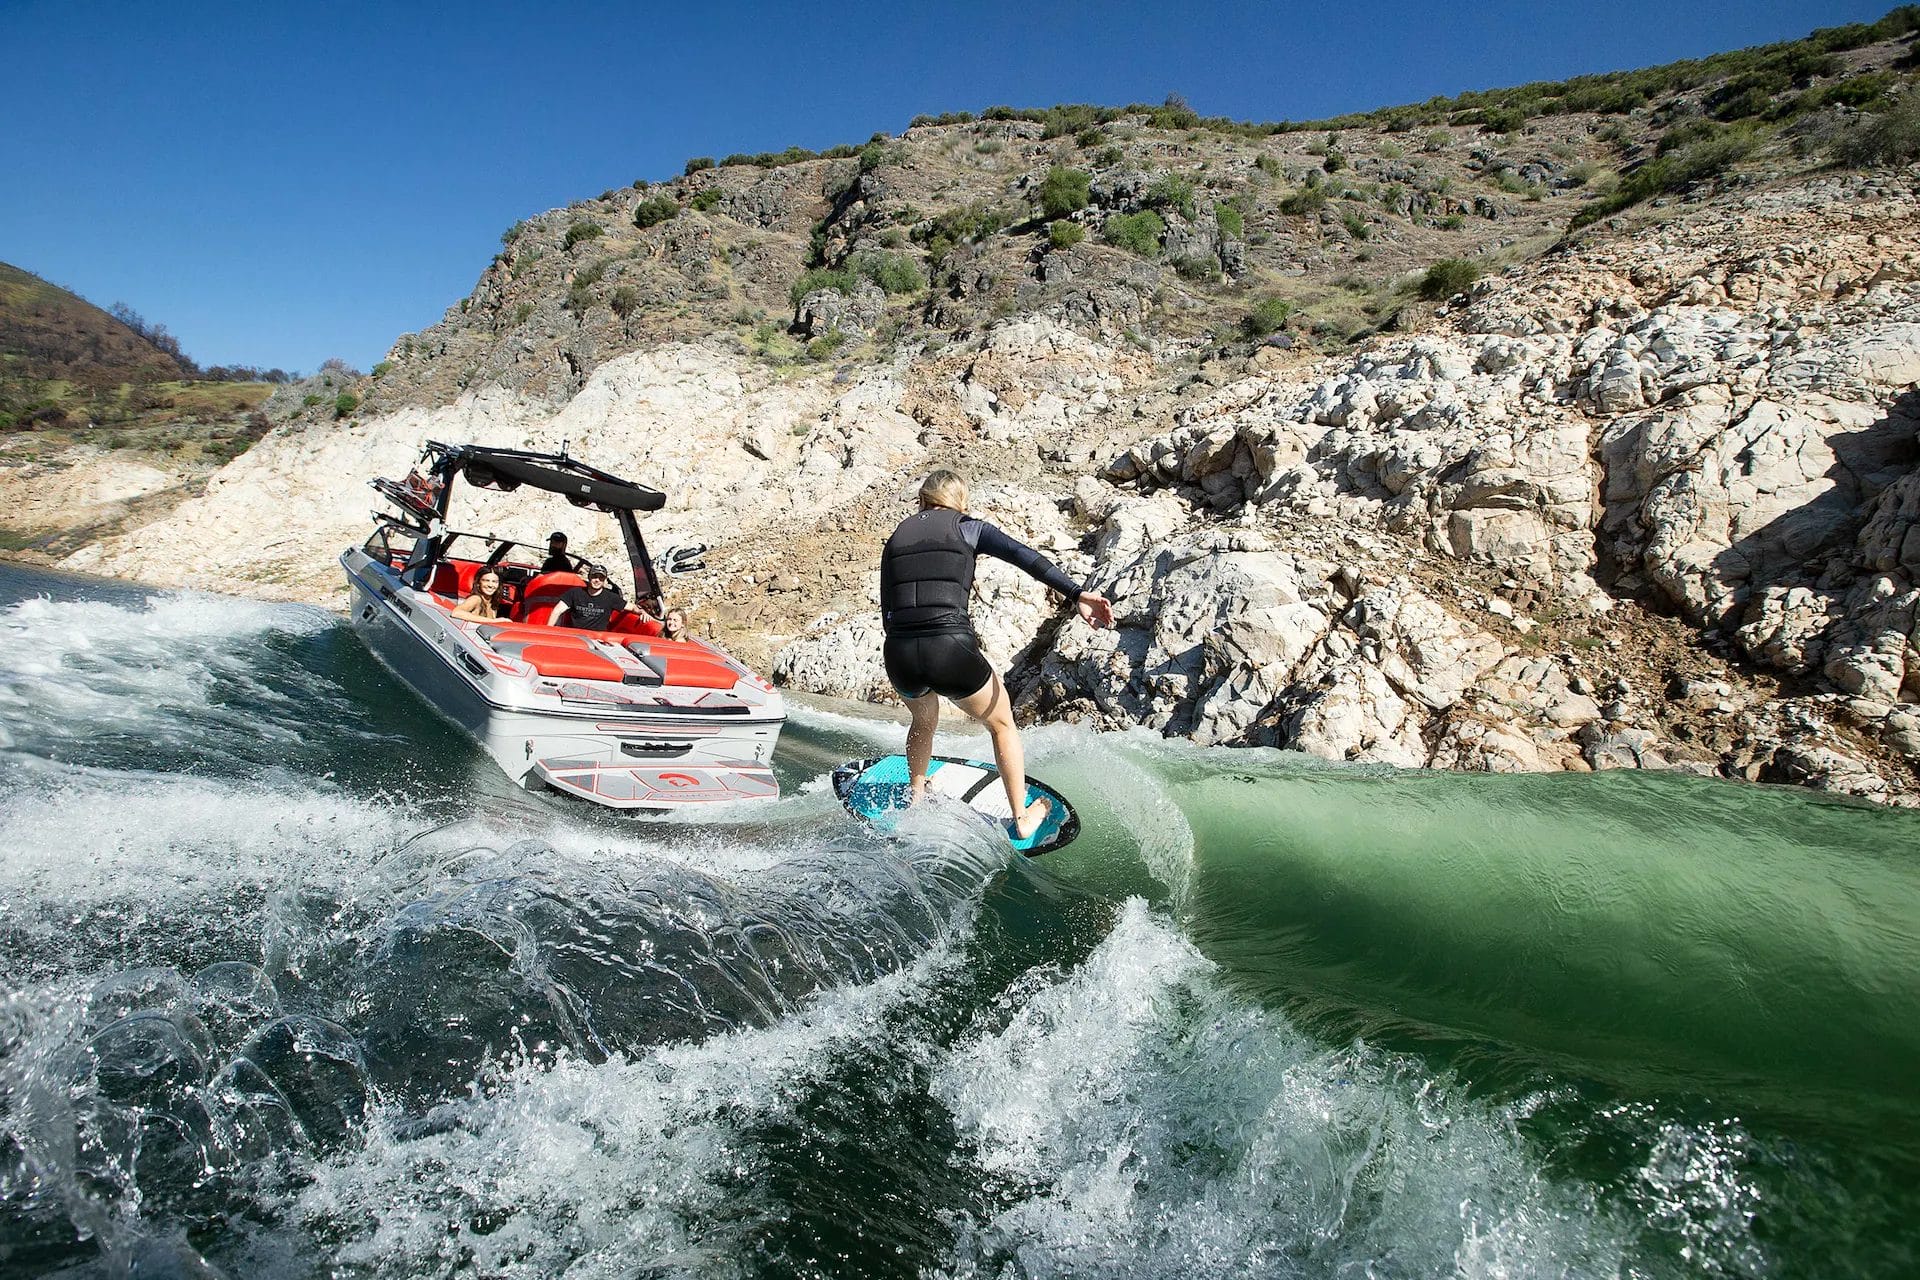 A man on a wakesurf board riding a wave behind a wakeboat.